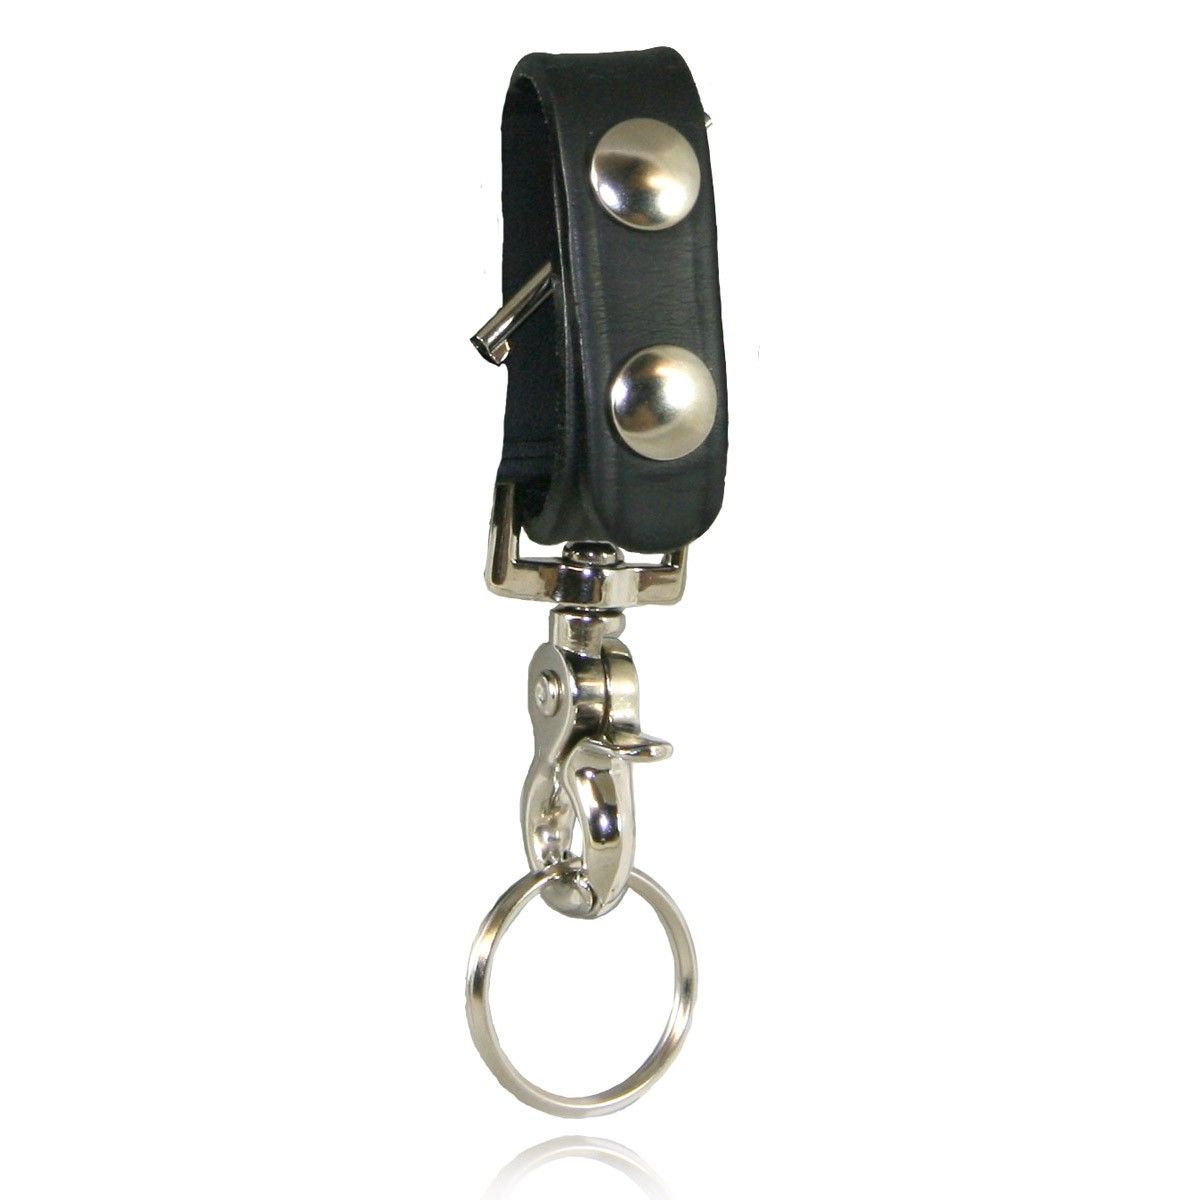 Belt Keeper with Hidden Handcuff Key and Deluxe Swivel Key Snap